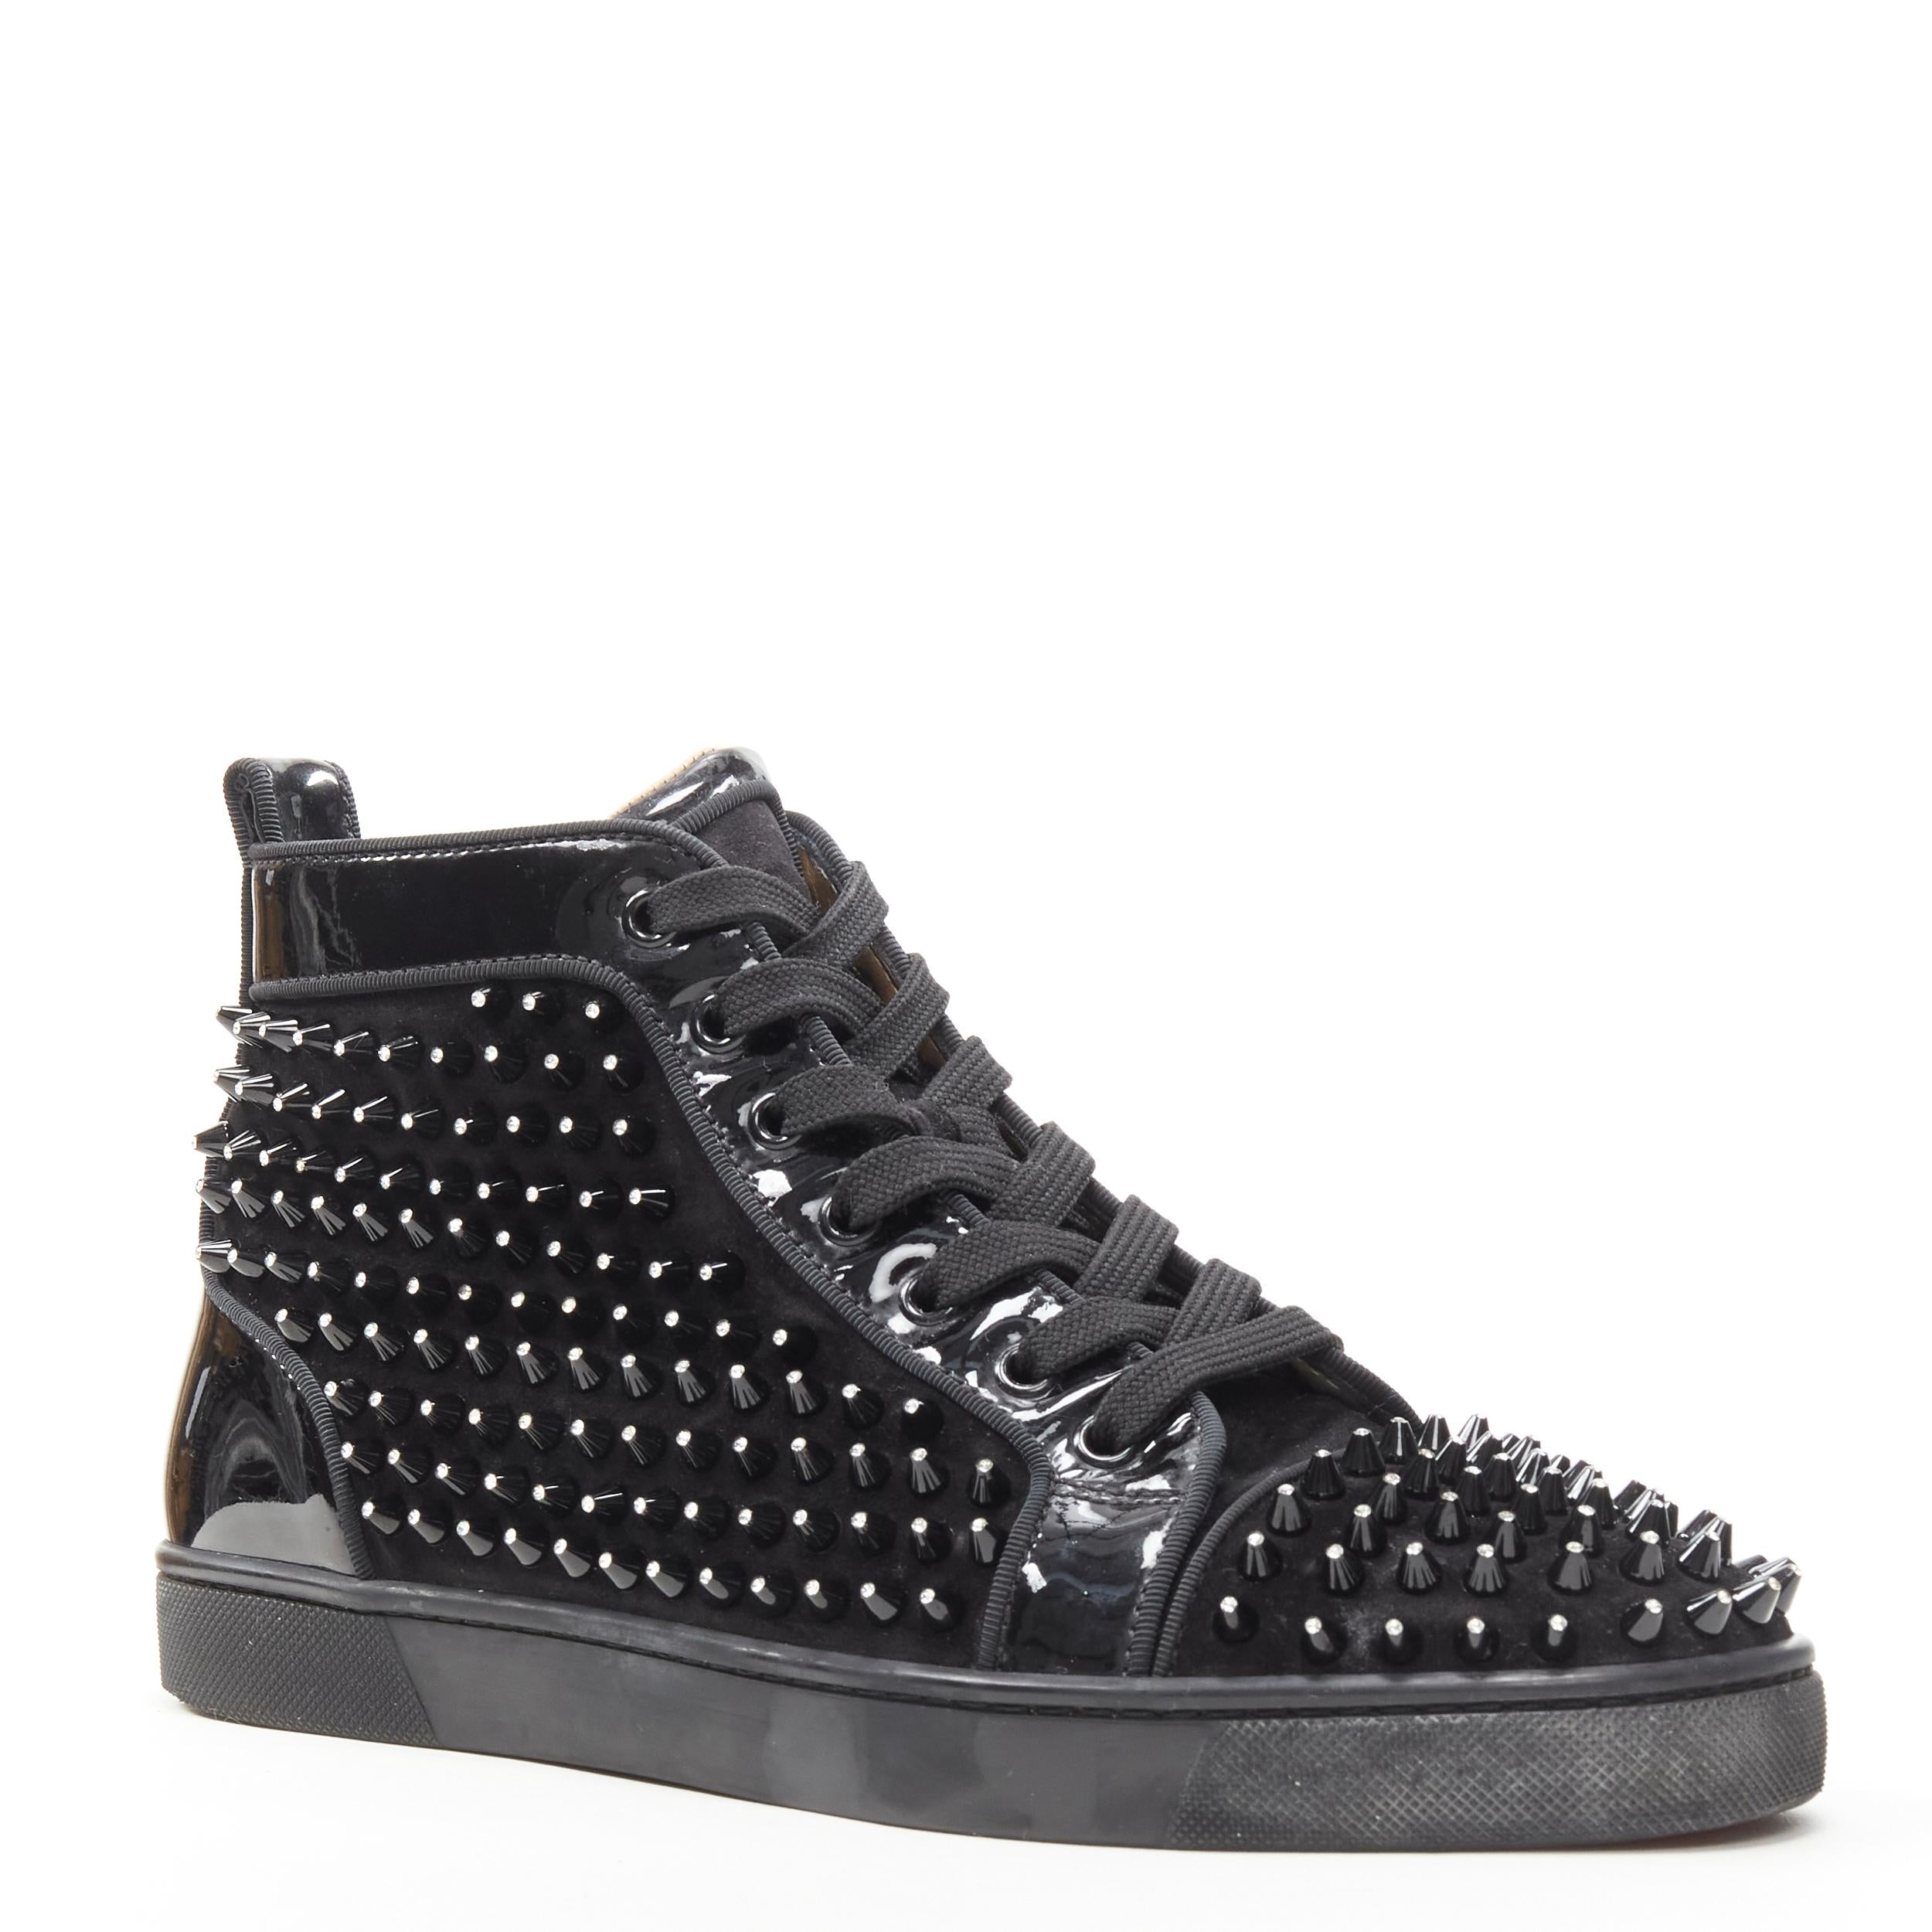 CHRISTIAN LOUBOUTIN Louis black velvet patent crystal spike stud sneaker EU41 
Reference: TGAS/B02179 
Brand: Christian Louboutin 
Designer: Christian Louboutin 
Model: Louis 
Material: Velvet 
Color: Black 
Pattern: Solid Closure: Lace Up 
Extra